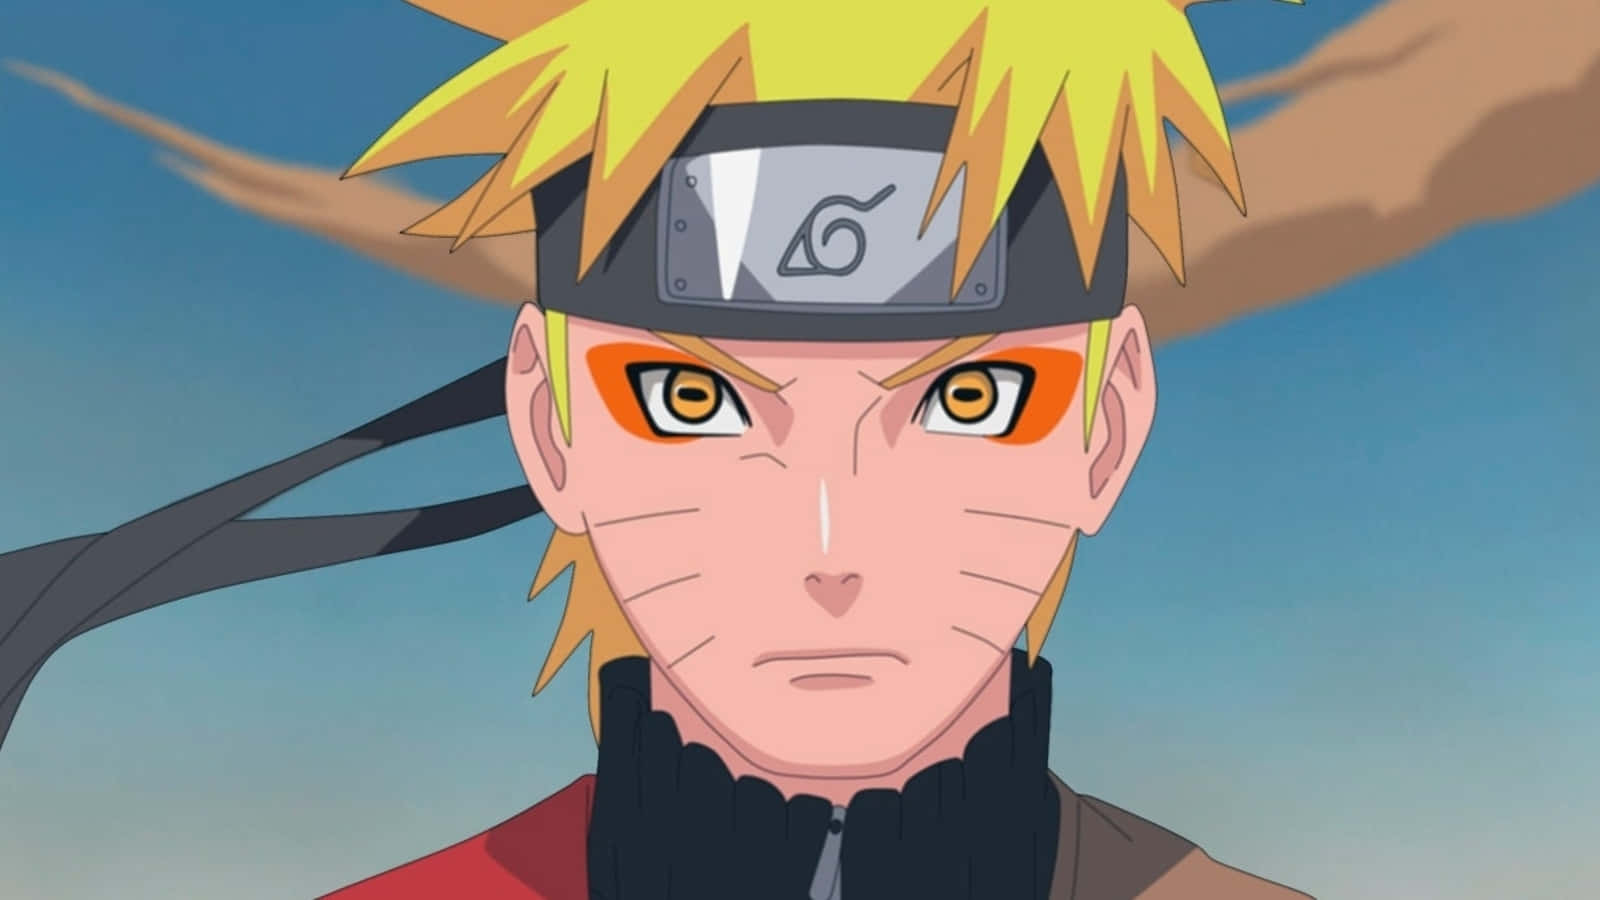 100+] Naruto Profile Pictures | Wallpapers.com